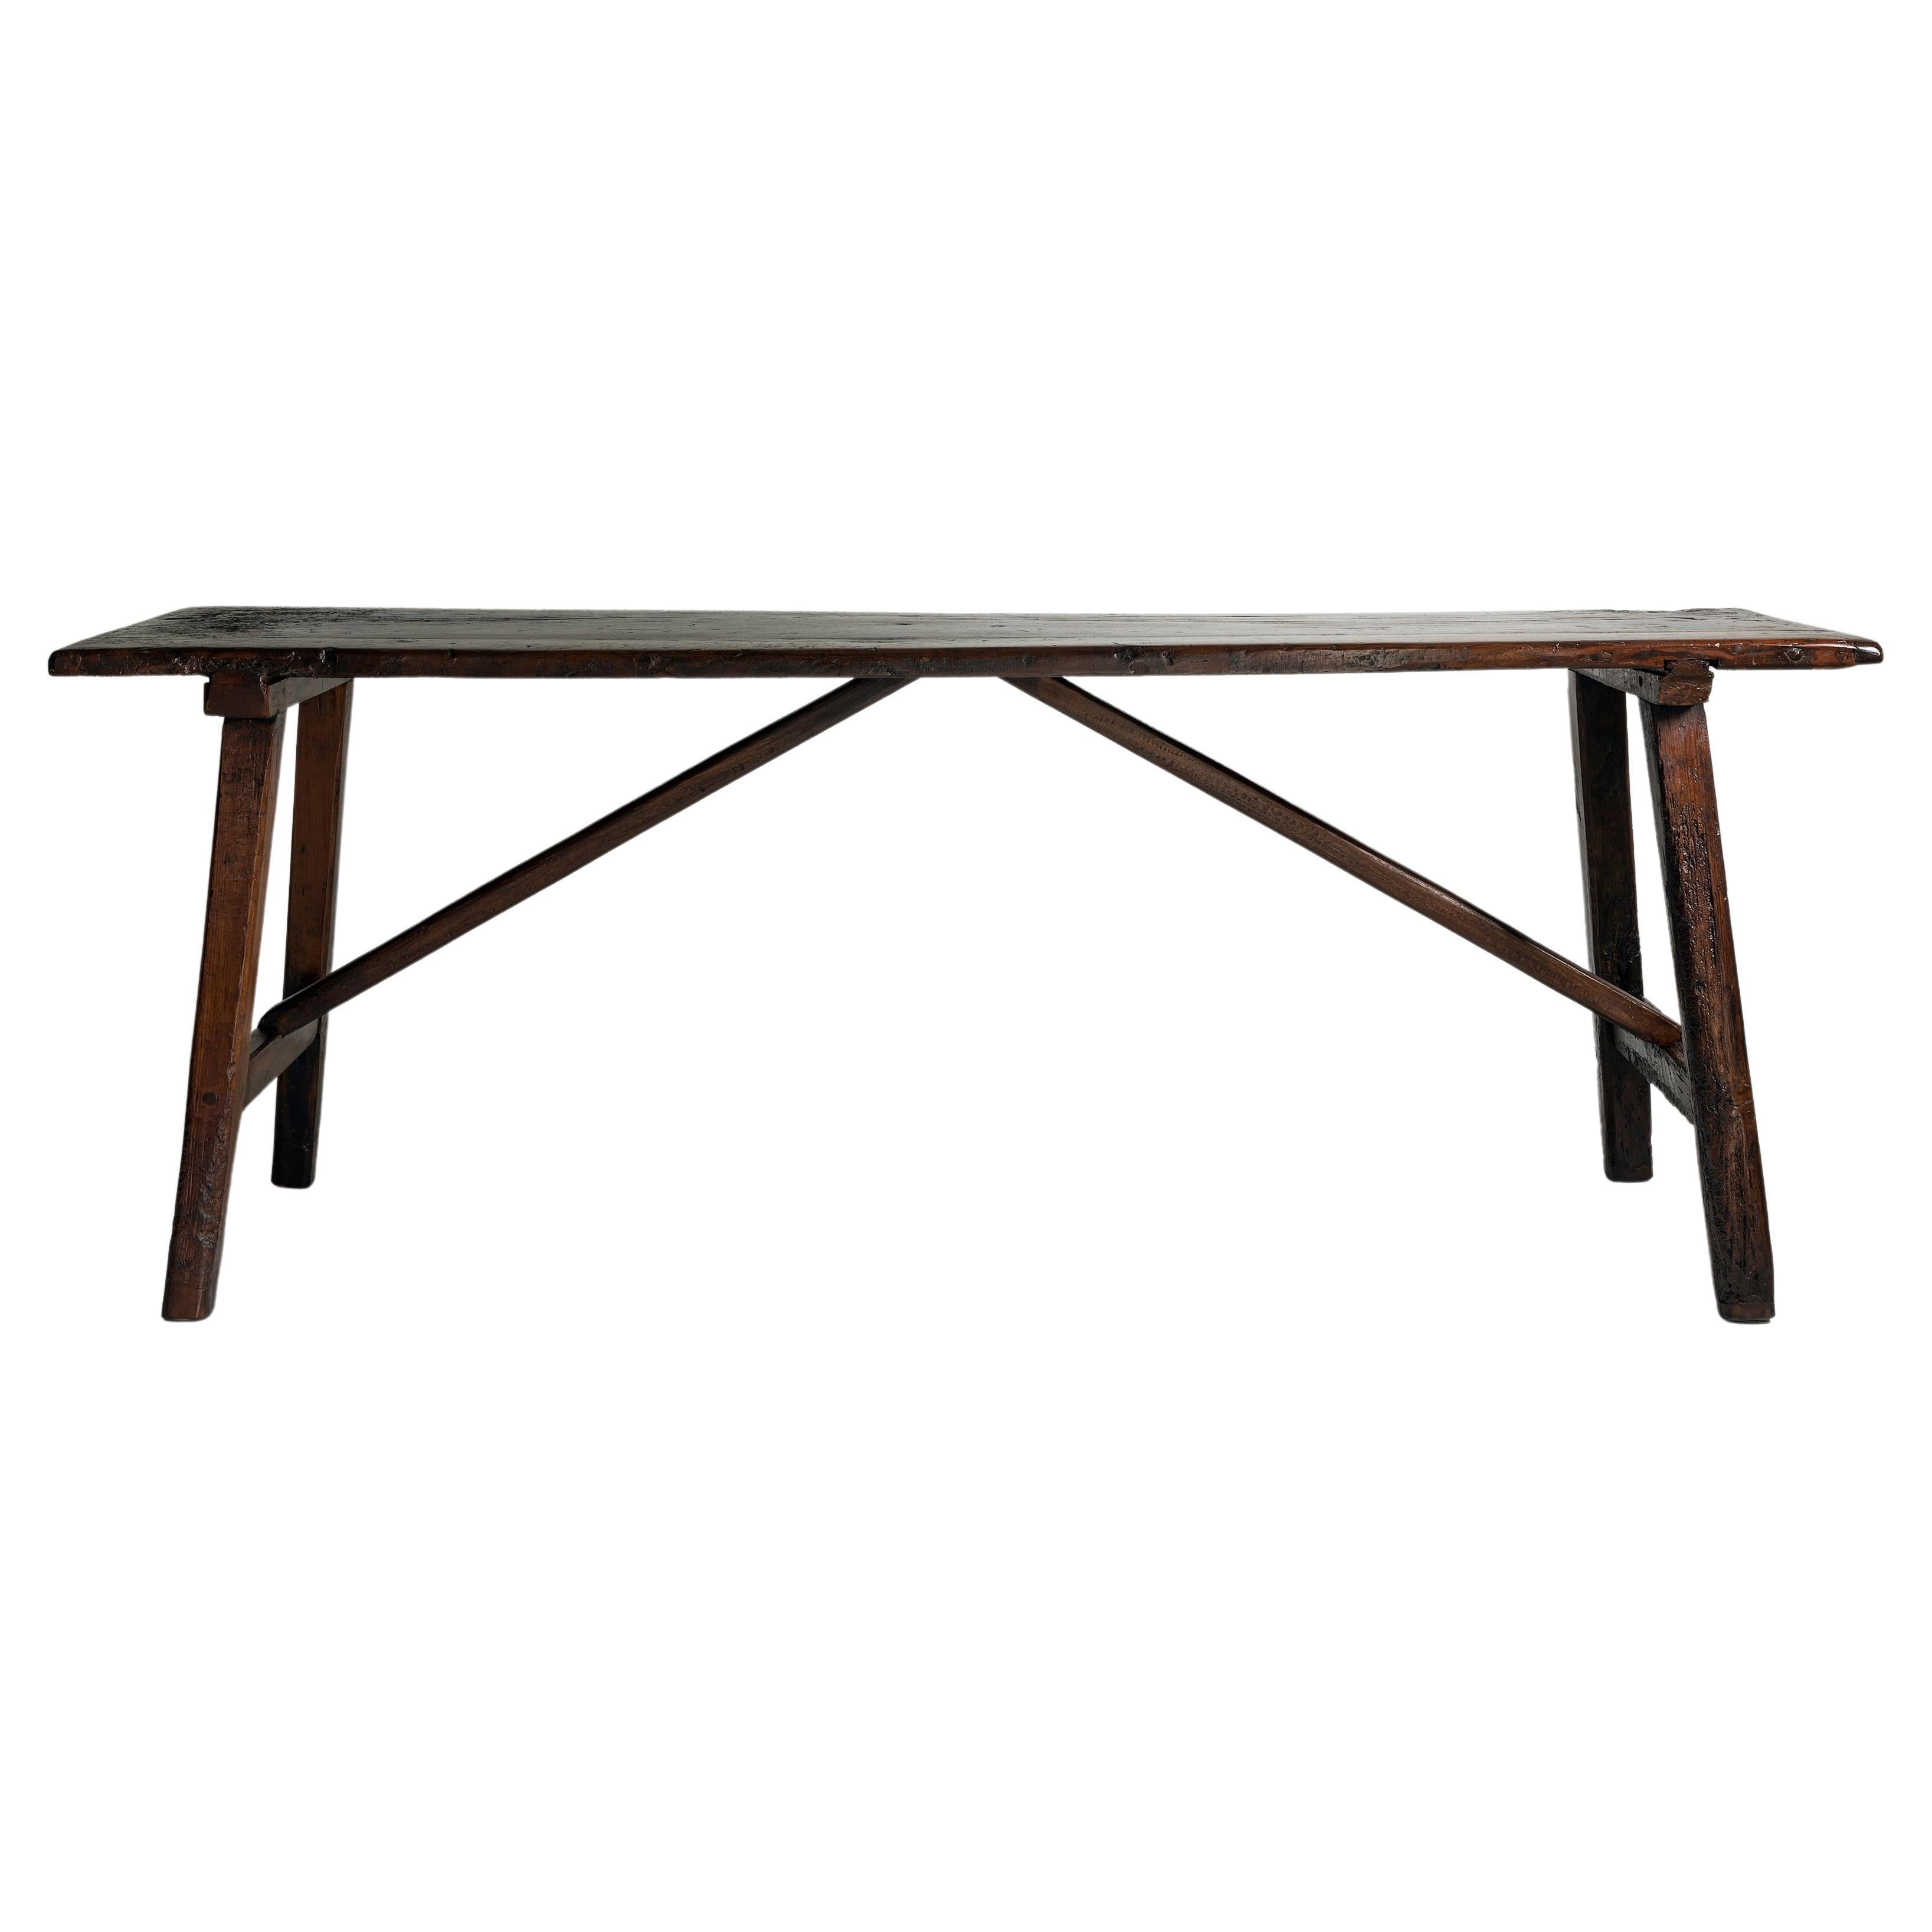 An exceptional 18th century Italian convent table, the table top made of one solid plank of Walnut.
A beautifully patinated table with great visual impact. Timeless and works in almost any setting. Perfect behind a sofa or as console in a hallway,